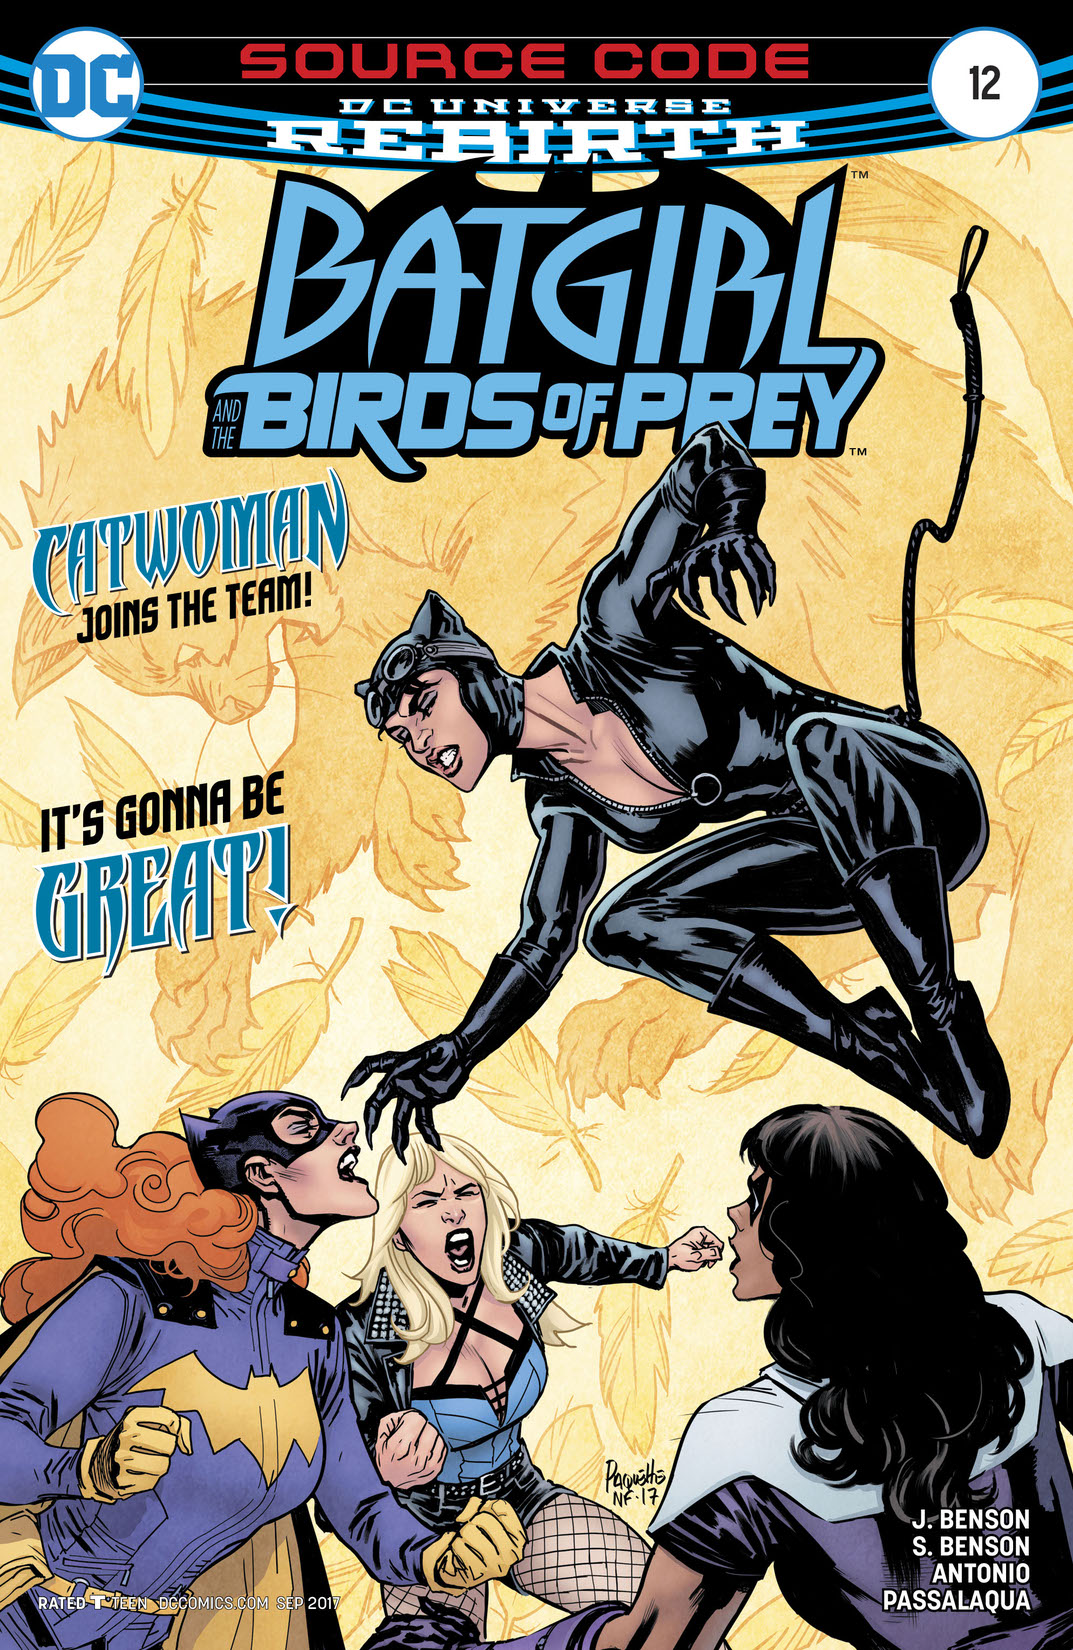 Batgirl and the Birds of Prey #12 preview images